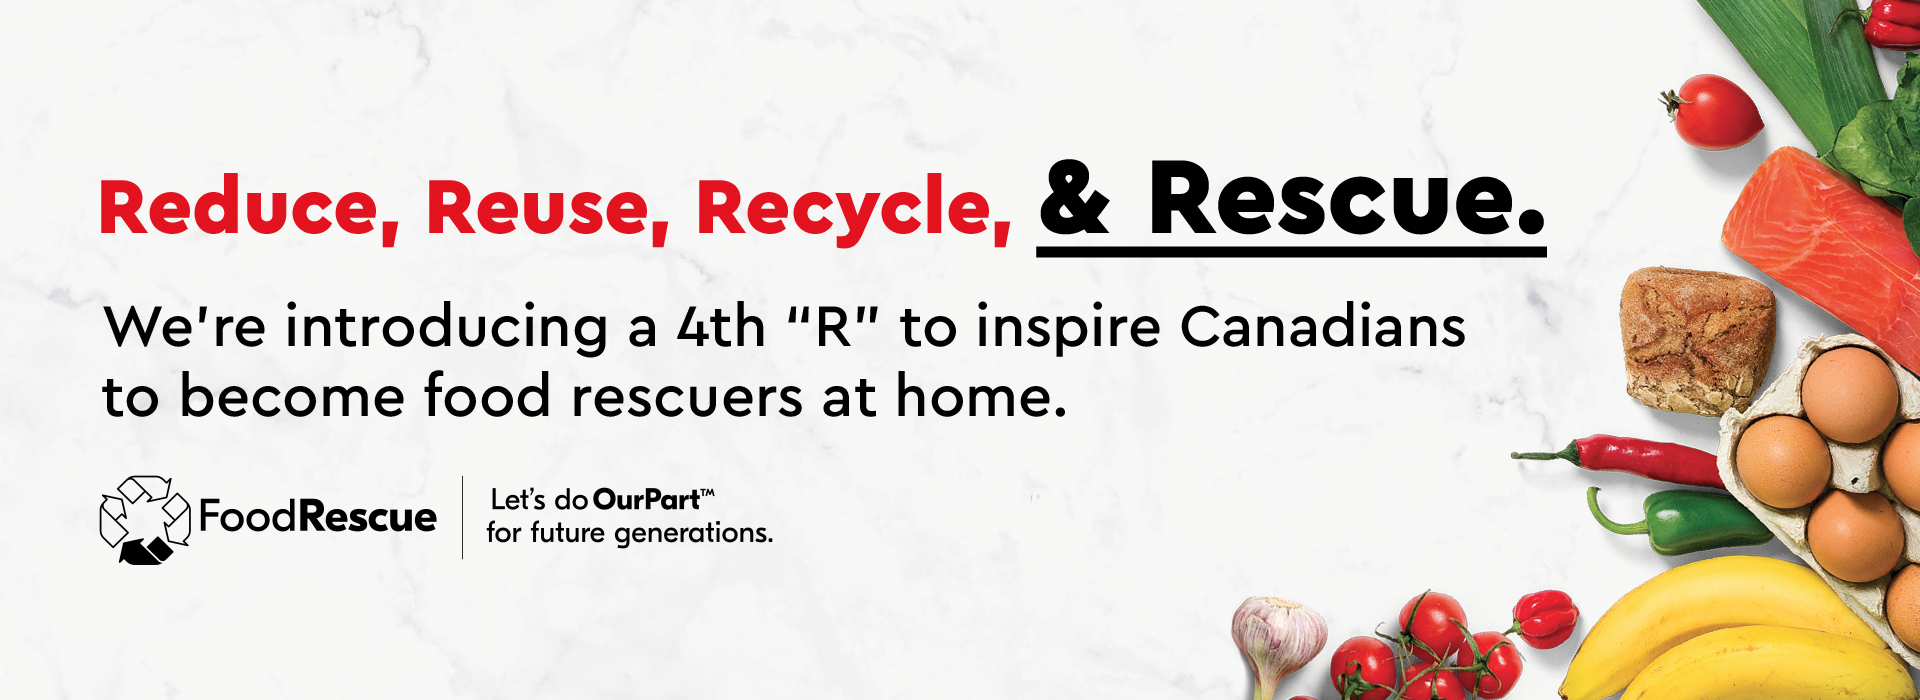 "Reduce, Reuse, Recycle, and Rescue. We're introducing a 4th R to inspire Canadians to become food rescuers at home" surrounded by loose organic vegetables